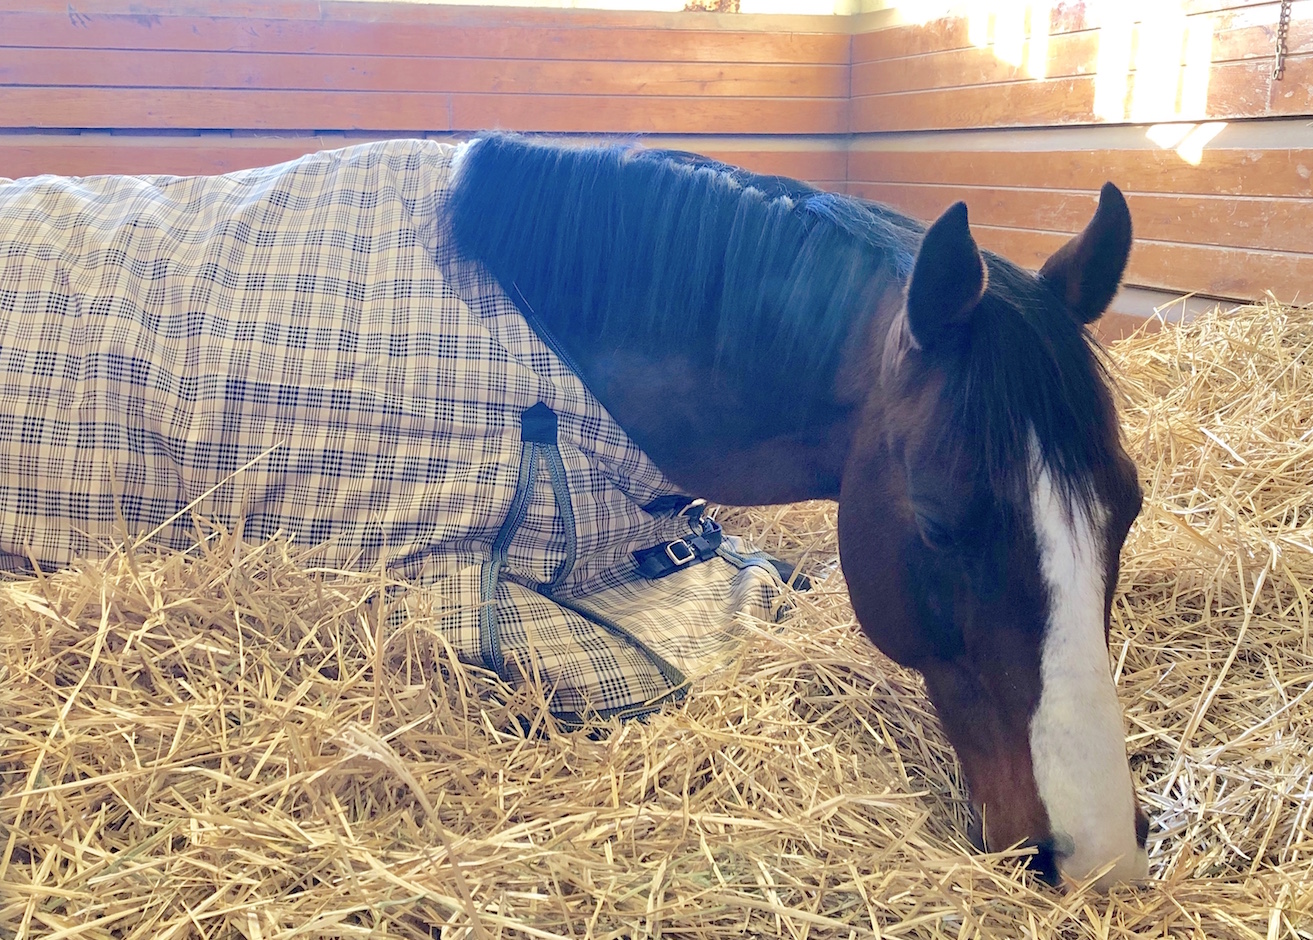 Keeping warm: successful Lane’s End sire Union Rags, whose pedigree traces back to one of the original stallions at the farm. Photo: Amanda Duckworth